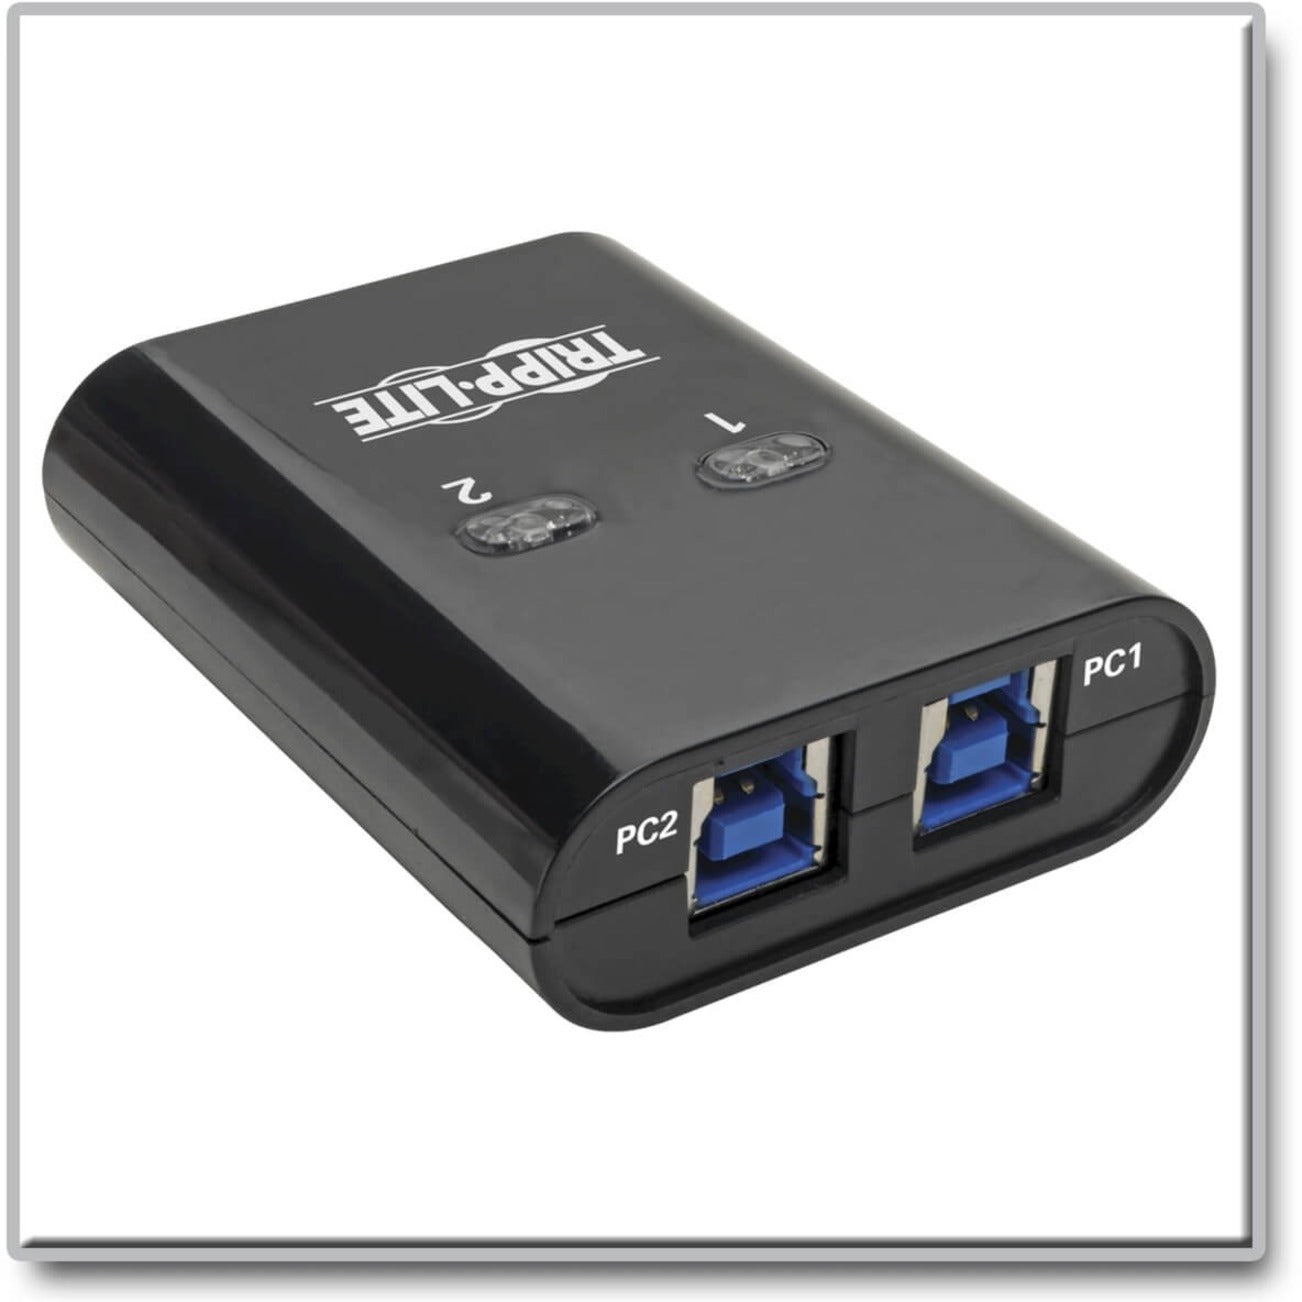 Tripp Lite U359-002 2-Port USB 3.0 Peripheral Sharing Switch - SuperSpeed, Convenient USB Switch for Easy Peripheral Sharing